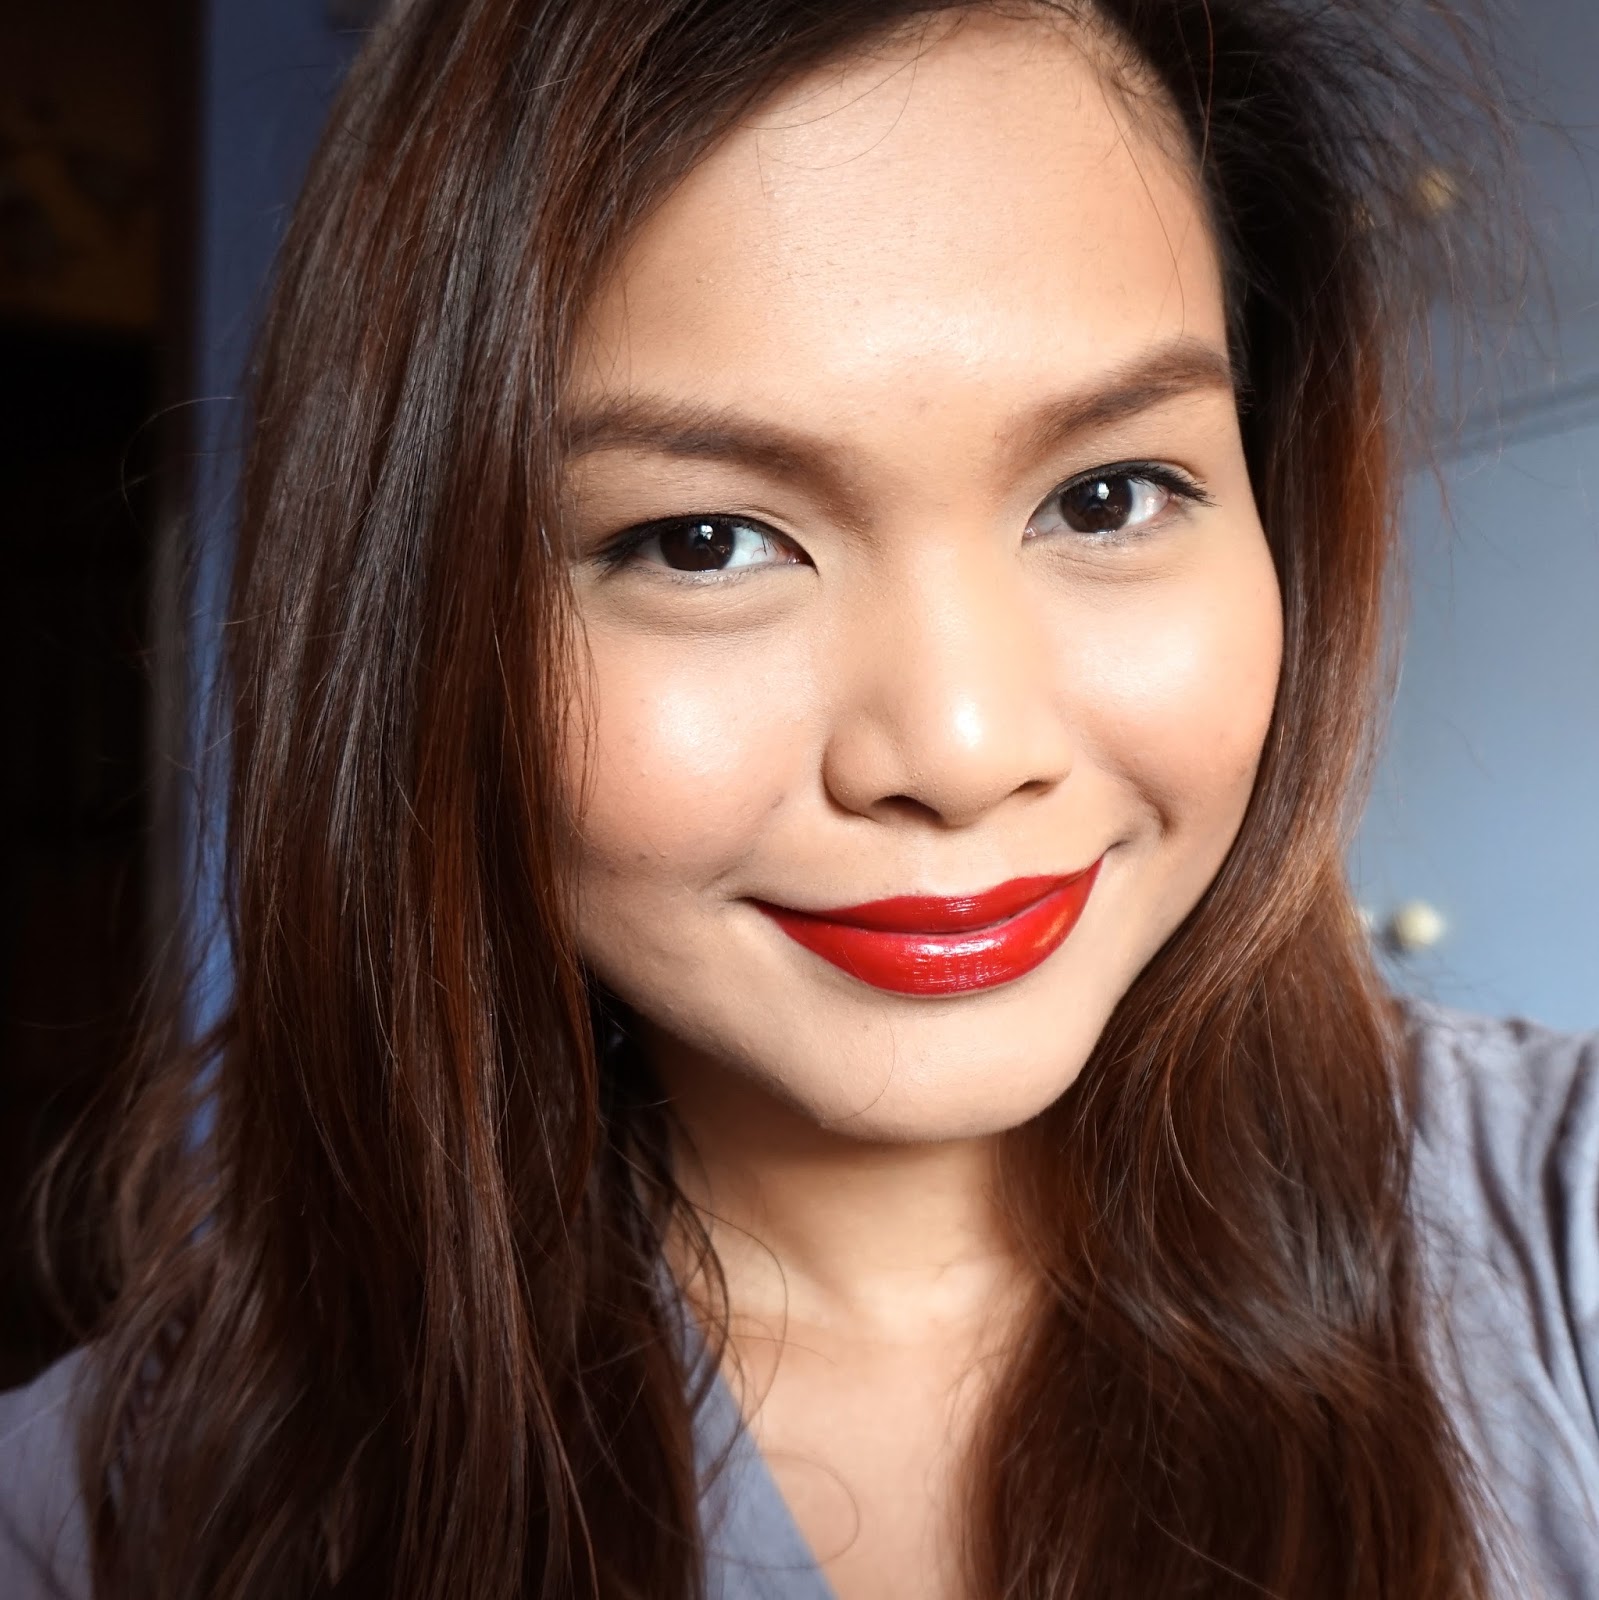 Maybelline Color Sensational Red Lipsticks Review + Swatches | The ...